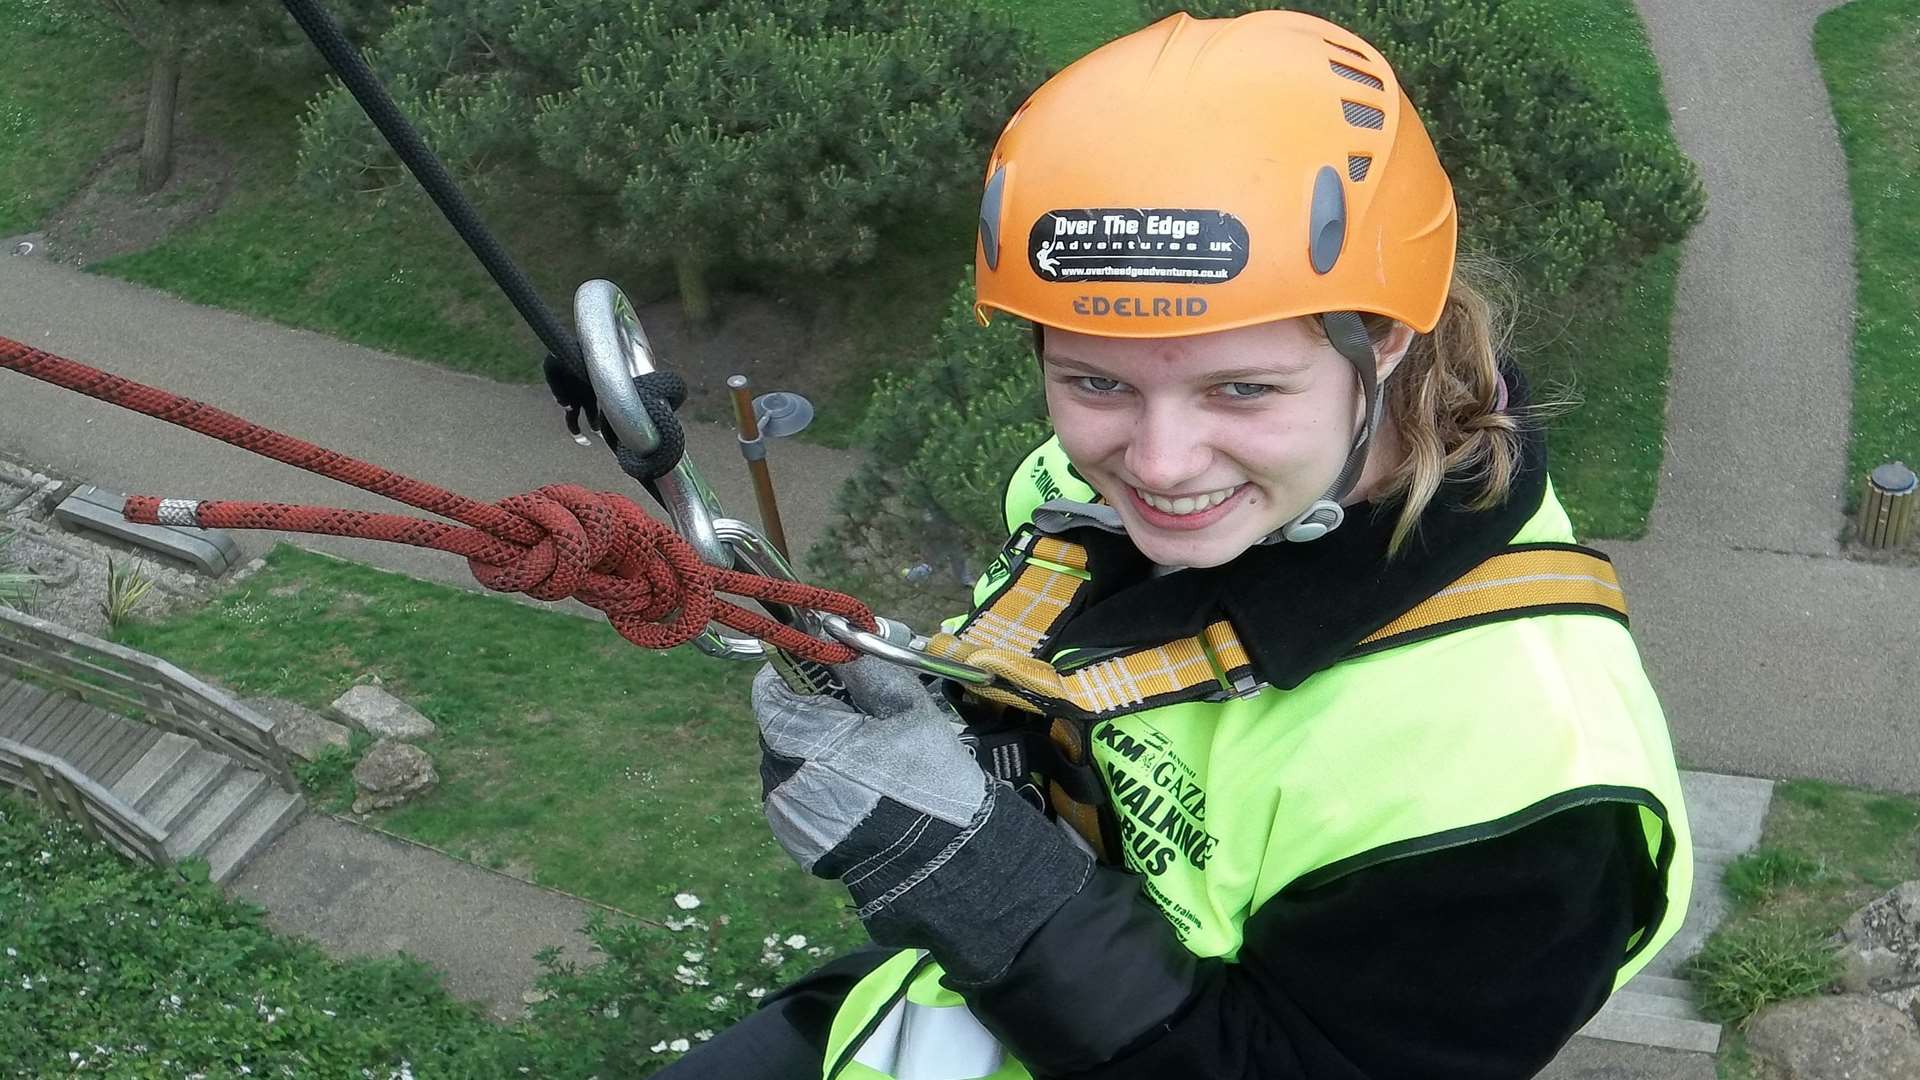 Jasmine Pole of Canterbury took part in last year's summer KM abseil challenge at Leas Cliff Hall Theatre, Folkestone which attracted 58 participants supporting 18 charities.